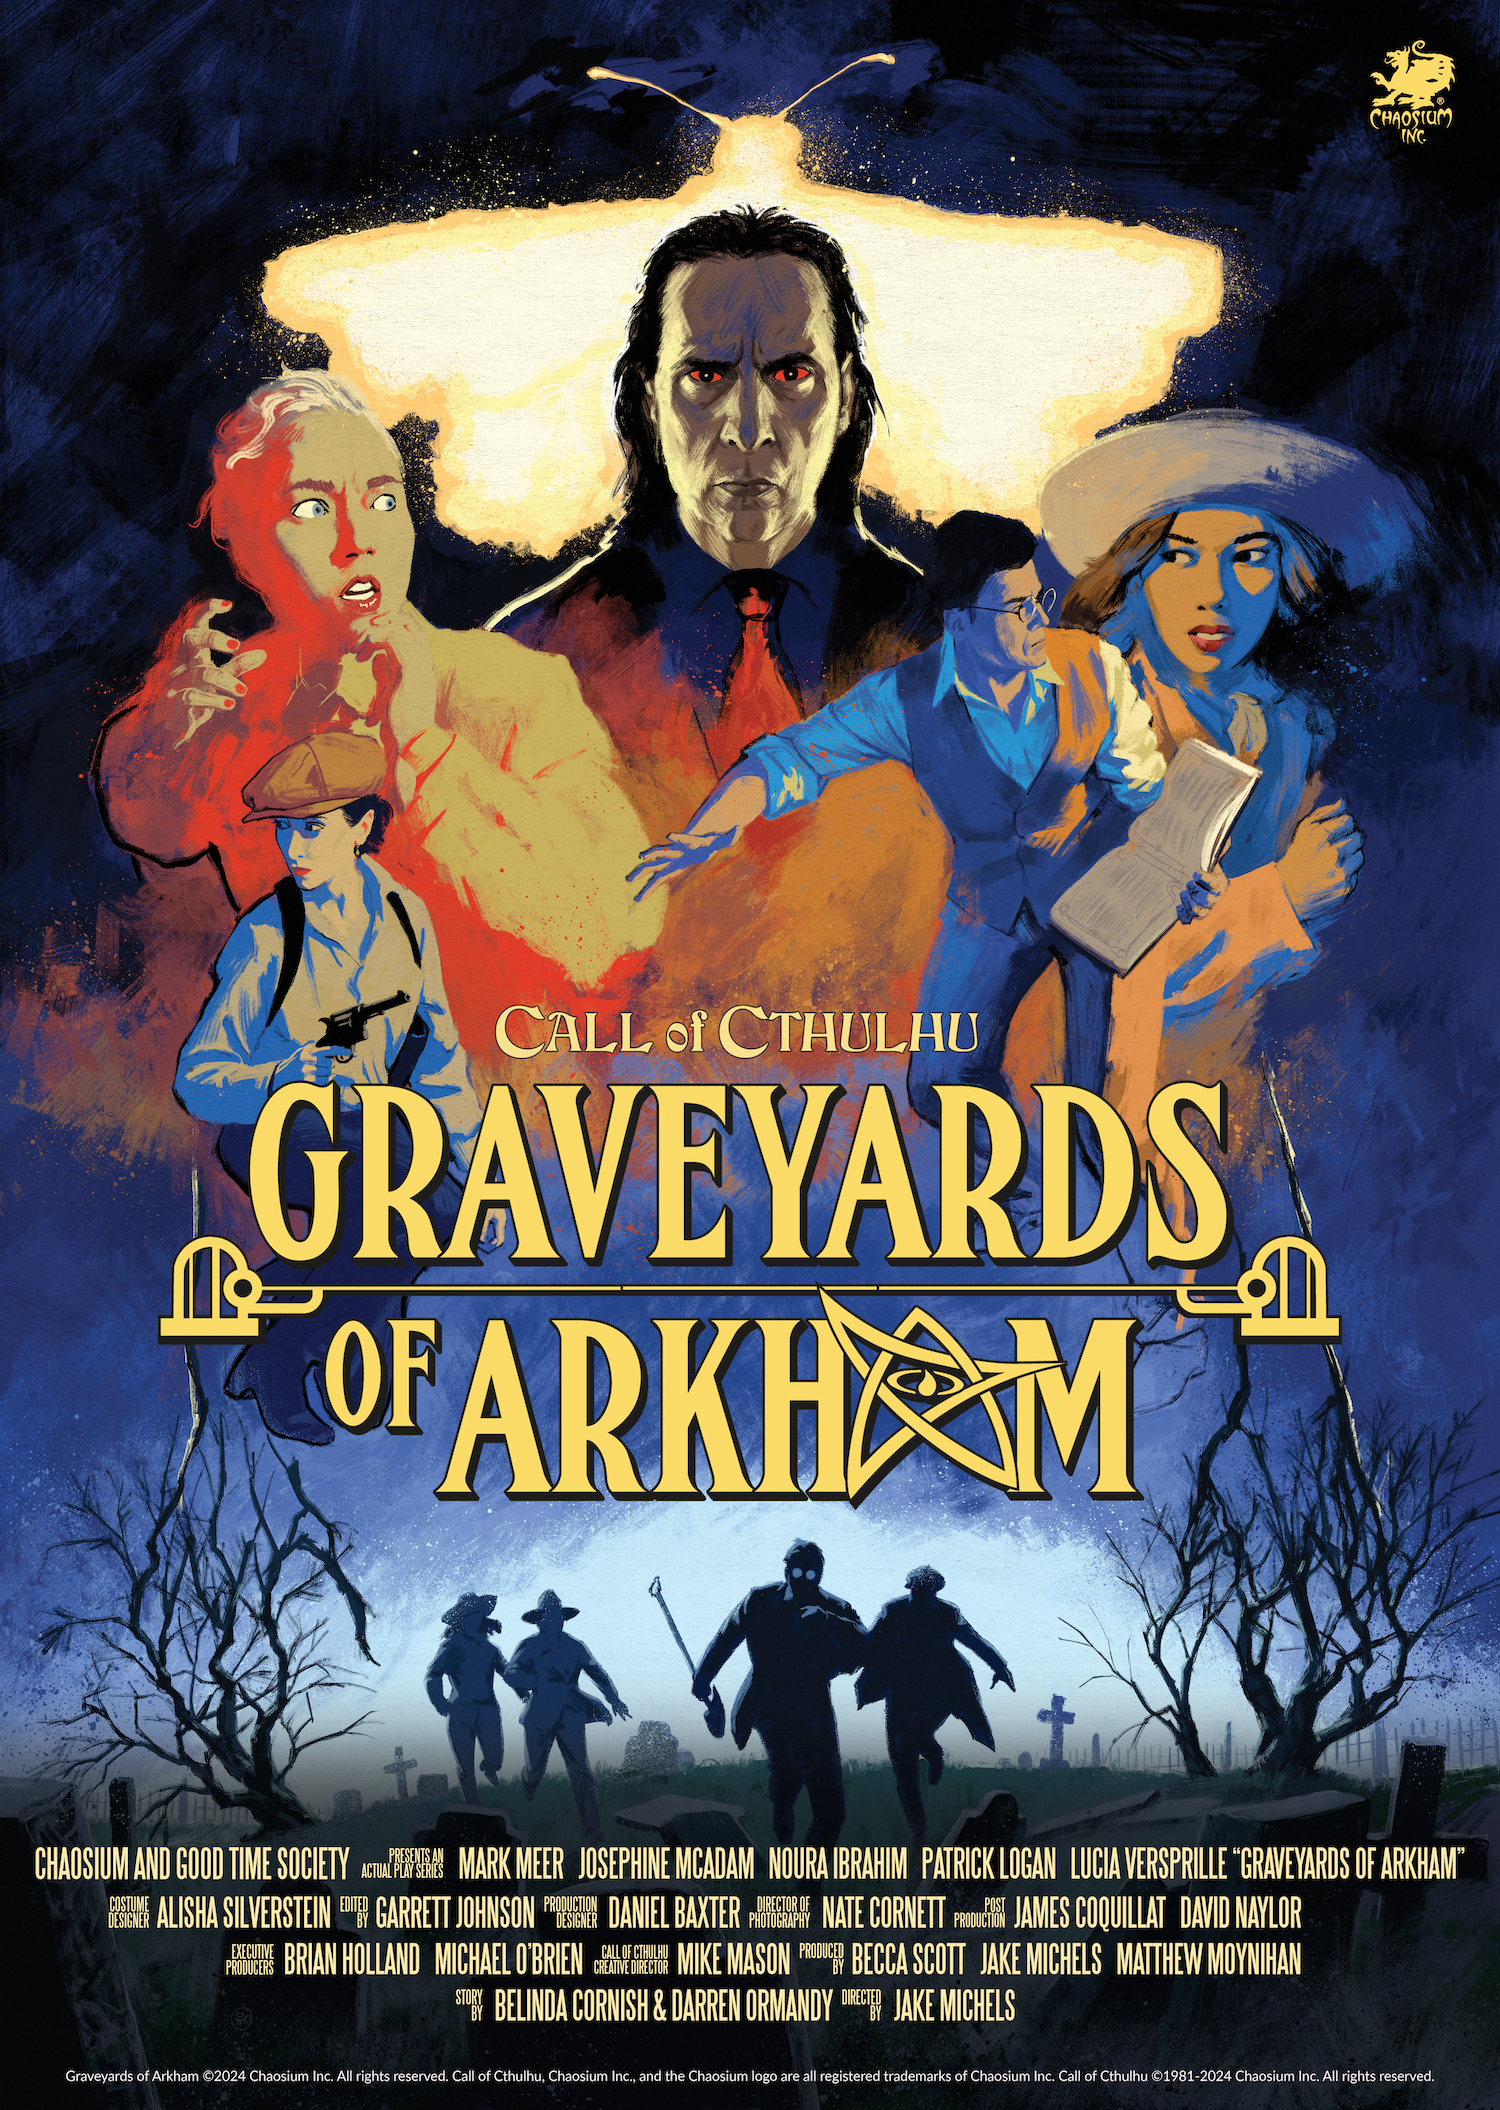 Graveyards of Arkham official movie poster